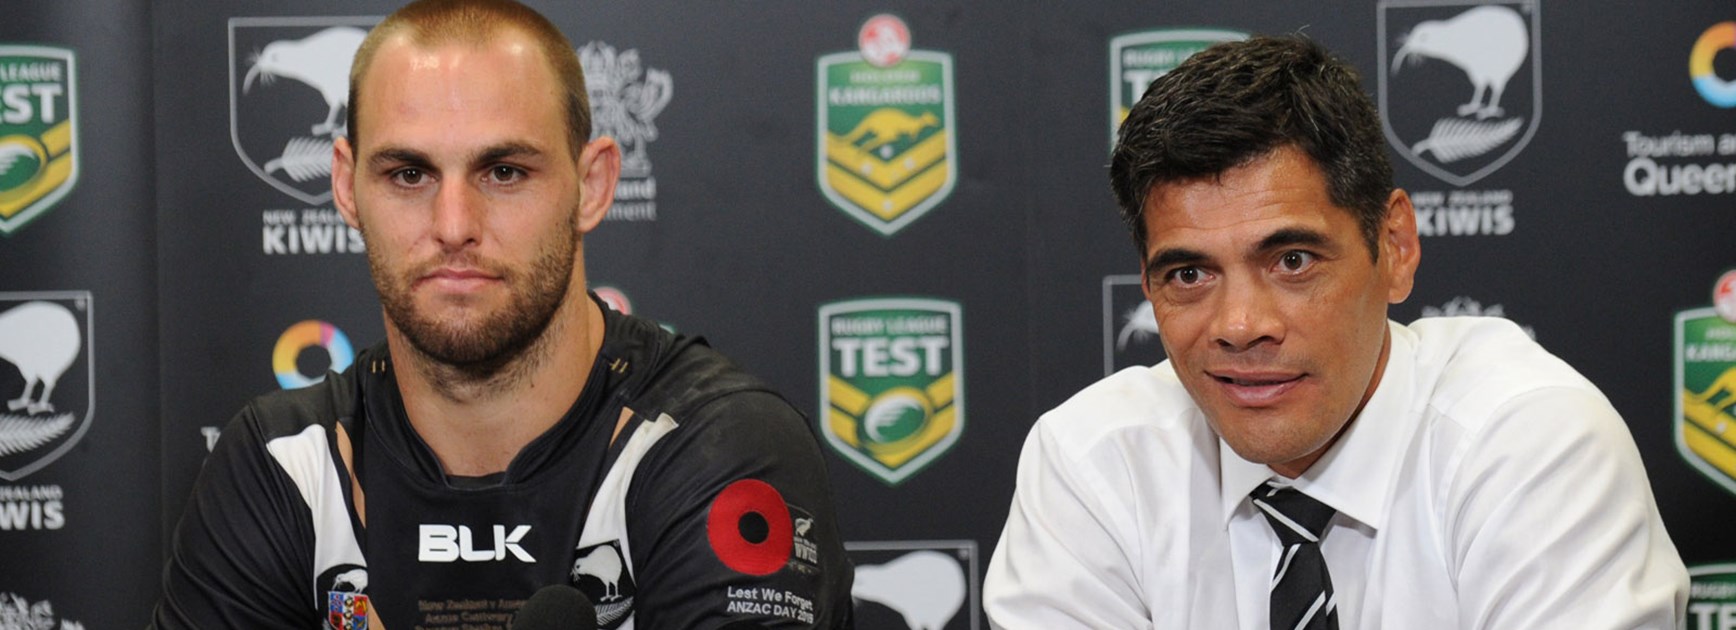 Kiwis coach Stephen Kearney and captain Simon Mannering after their side's win over the Kangaroos.